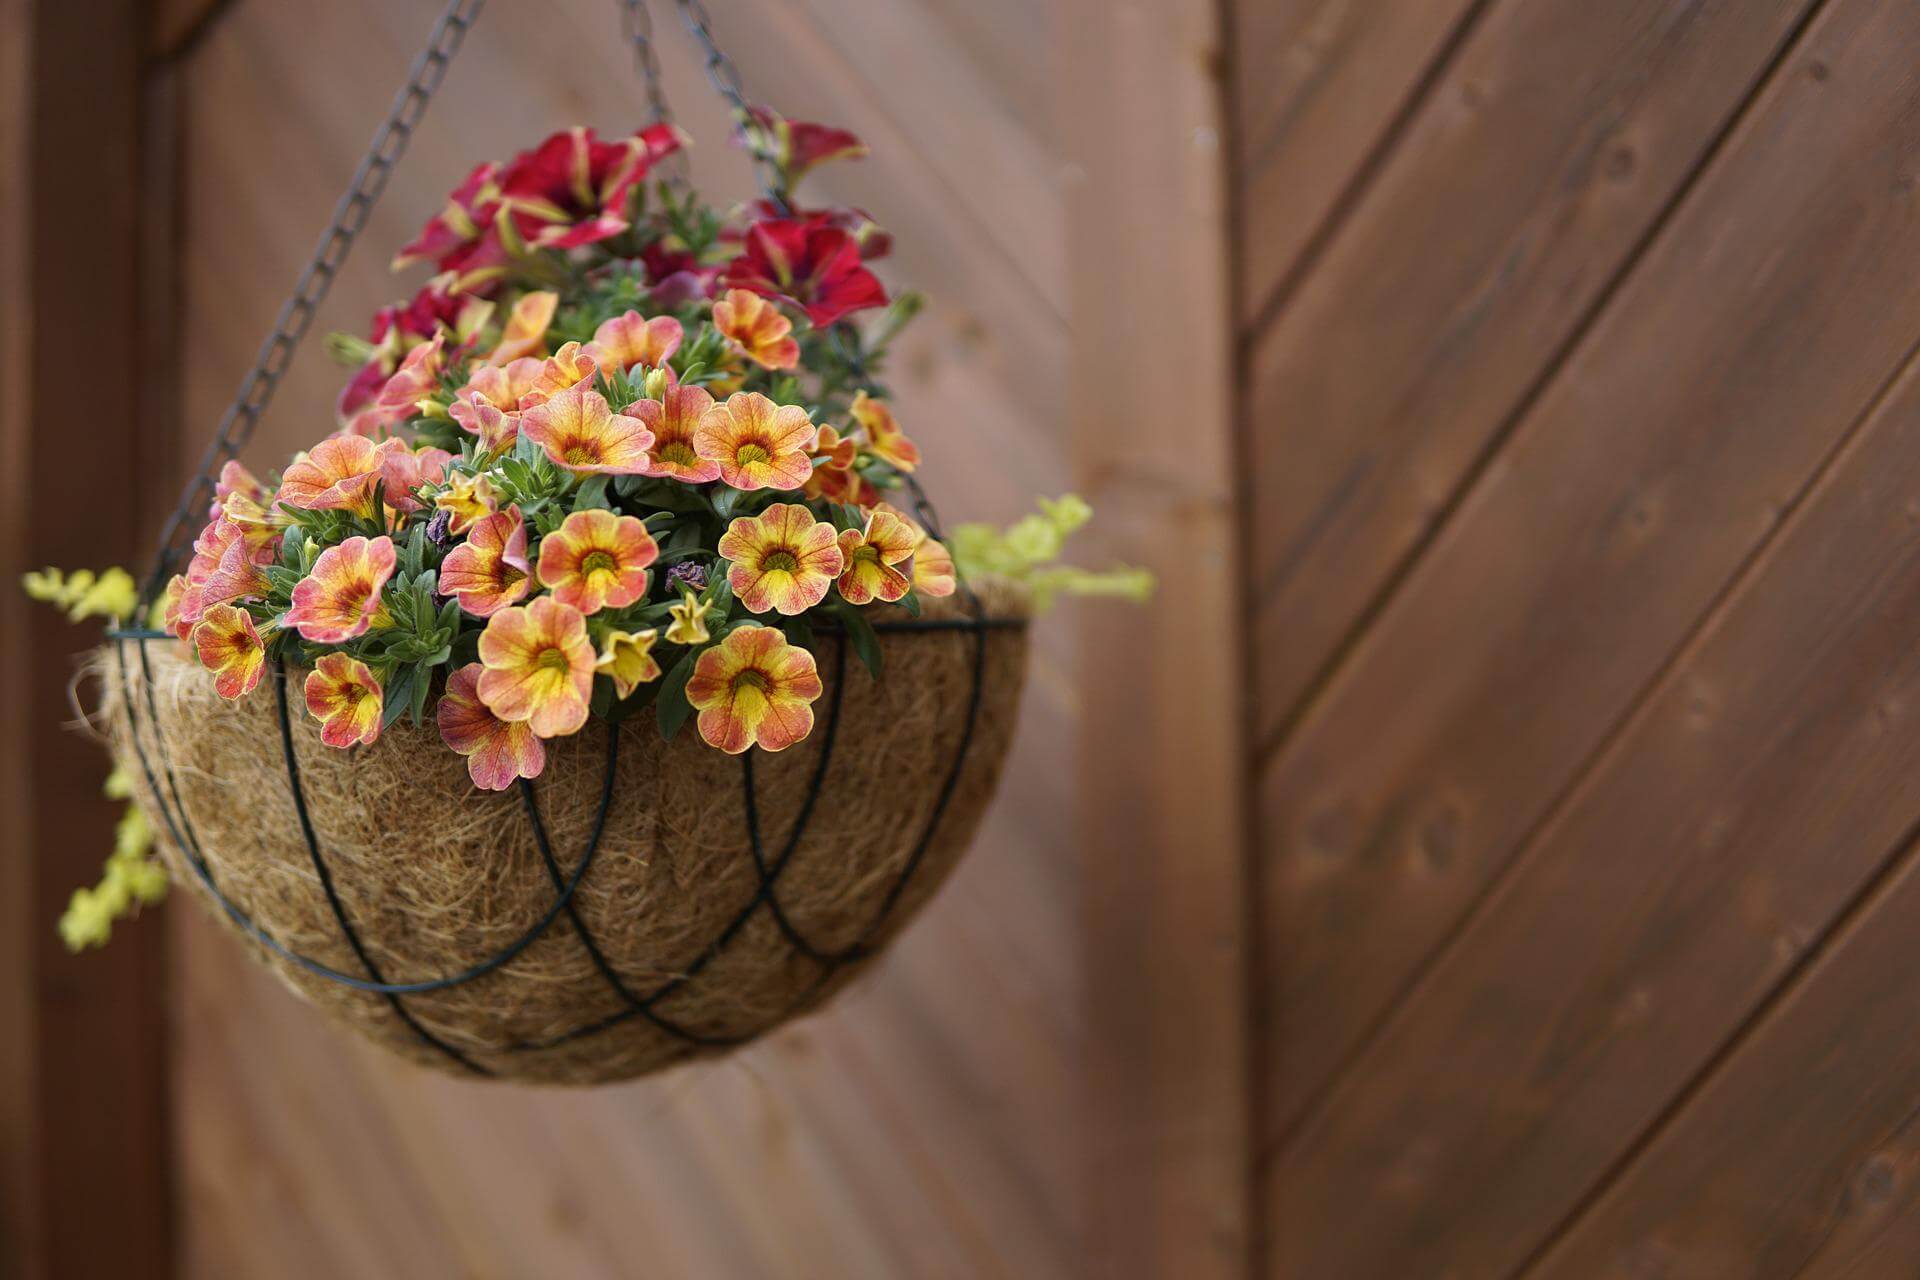 faux flowers in a hanging basket